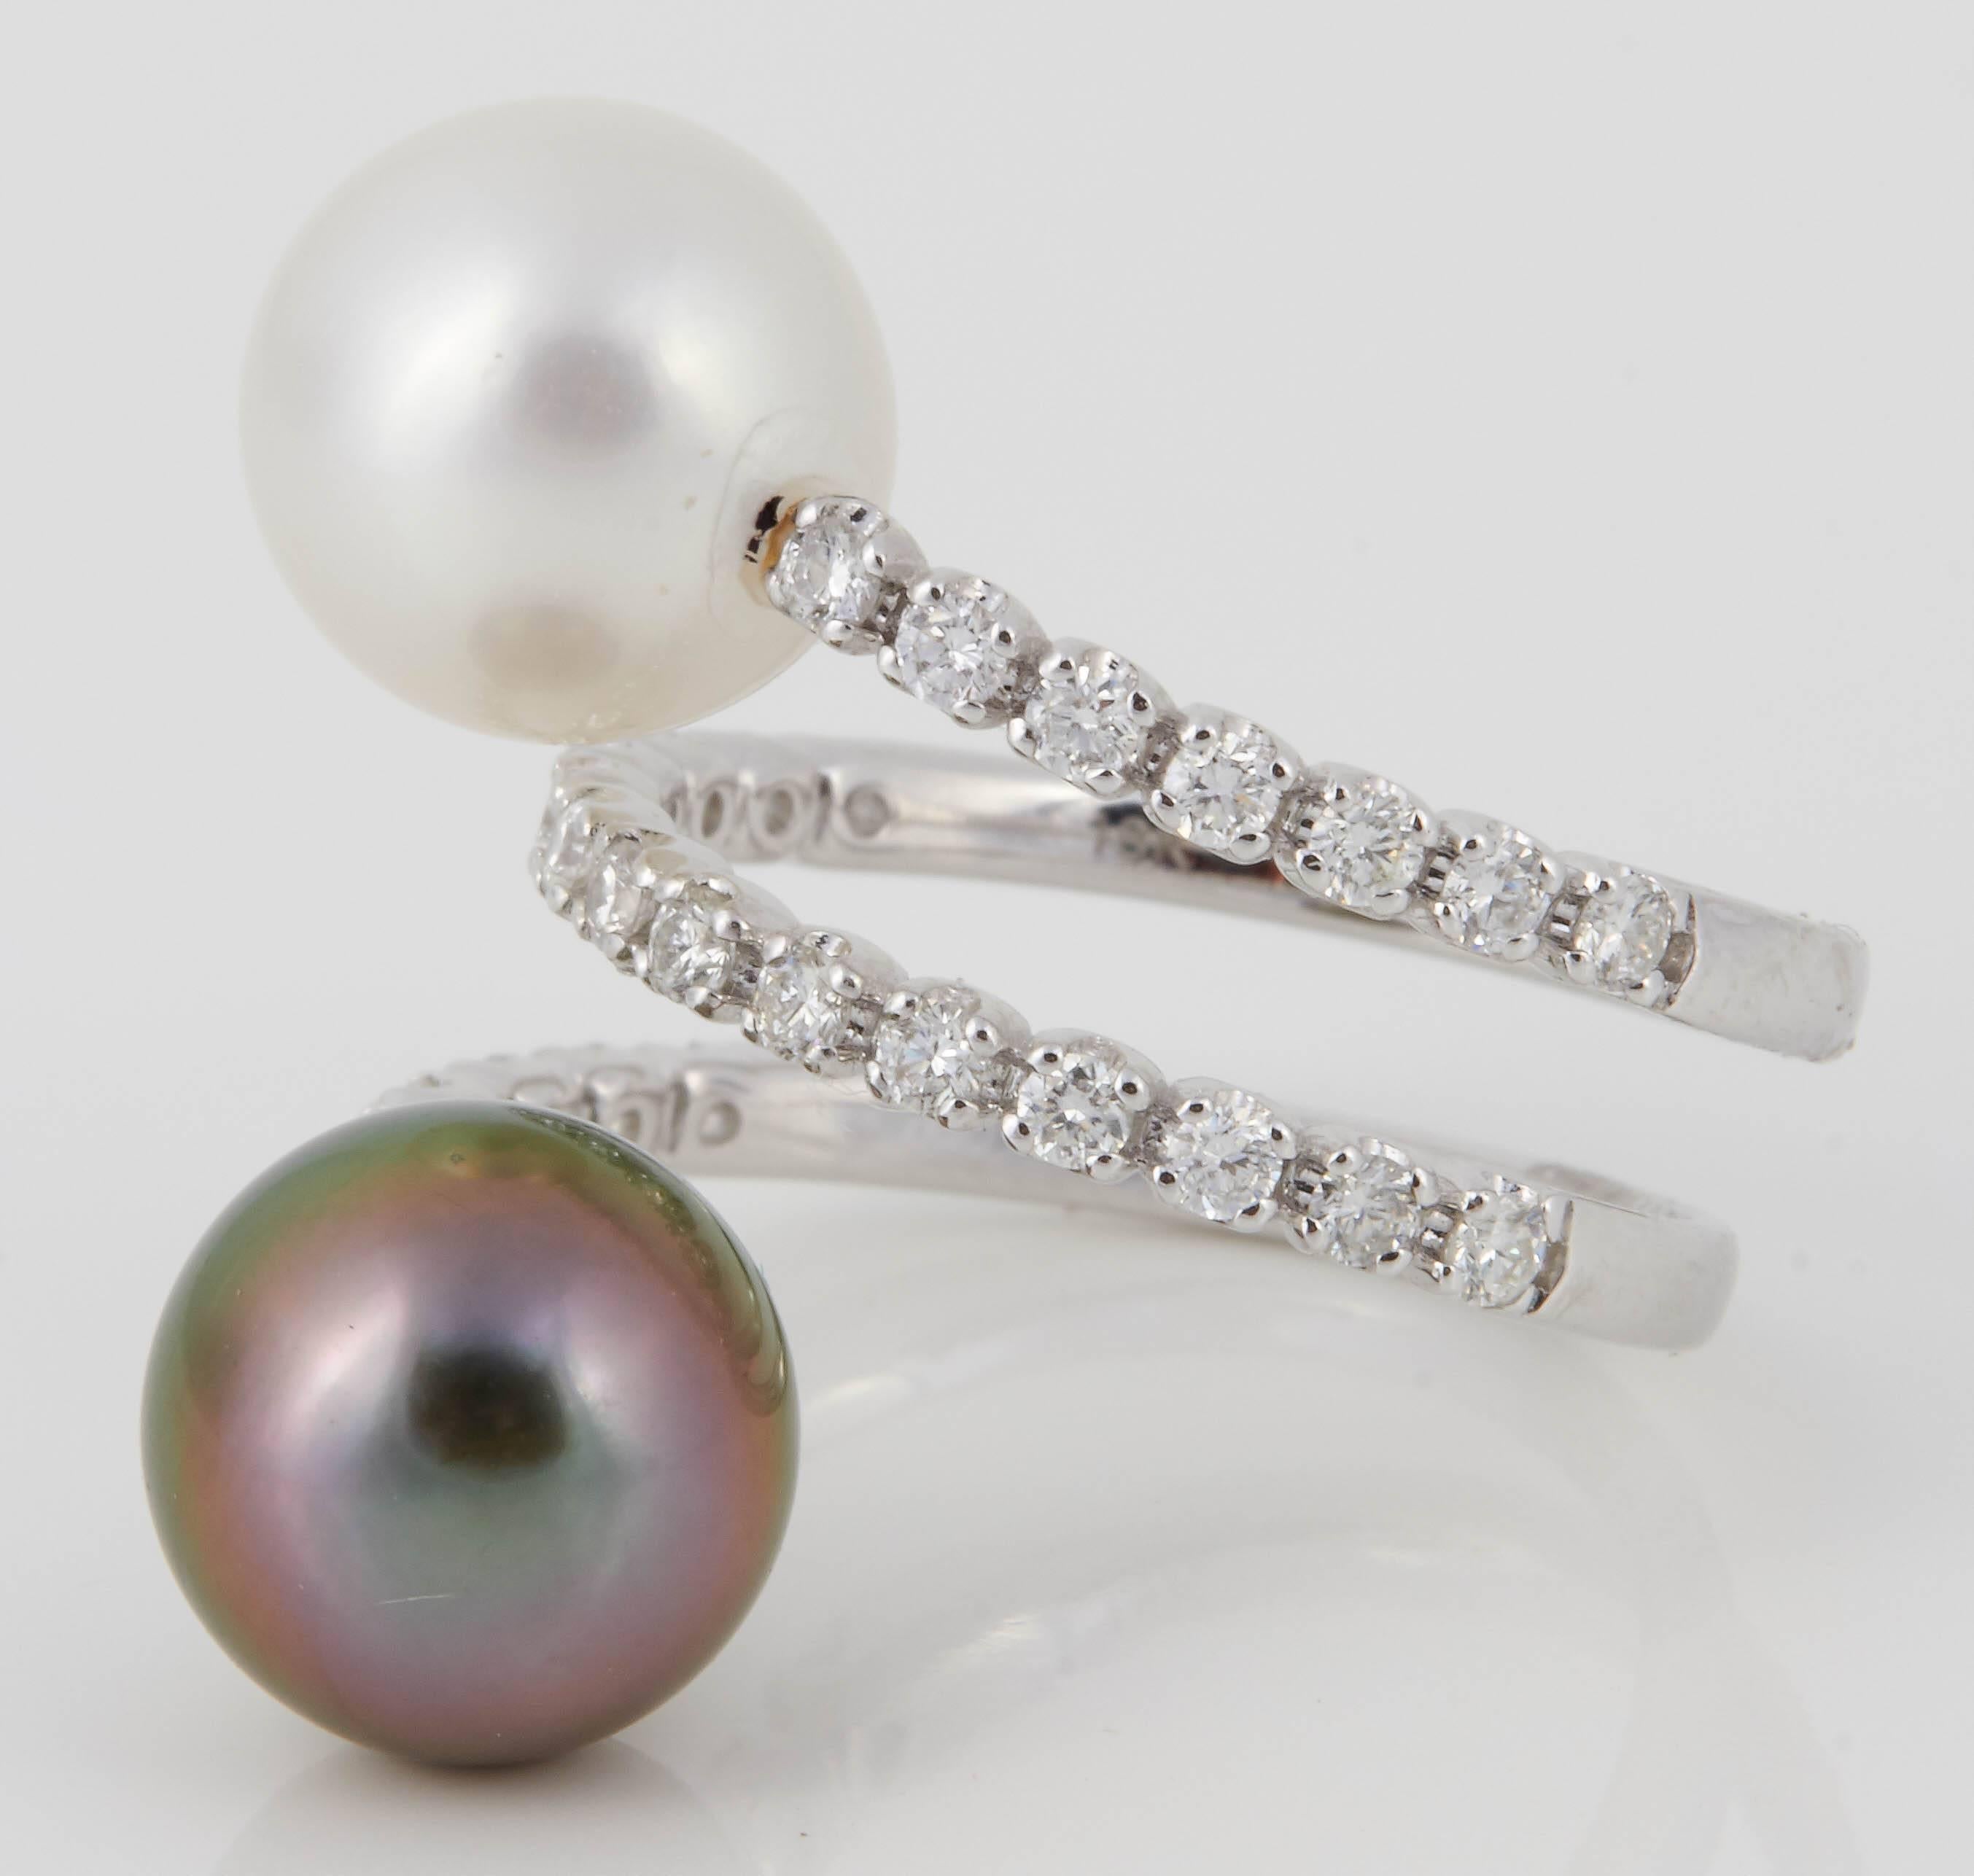 Diamond Count: 28
Diamond Weight: 0.60 cts.
Gold: 18KW
Pearl: South Sea and Tahitian:
Pearls Size: 9.50-10mm